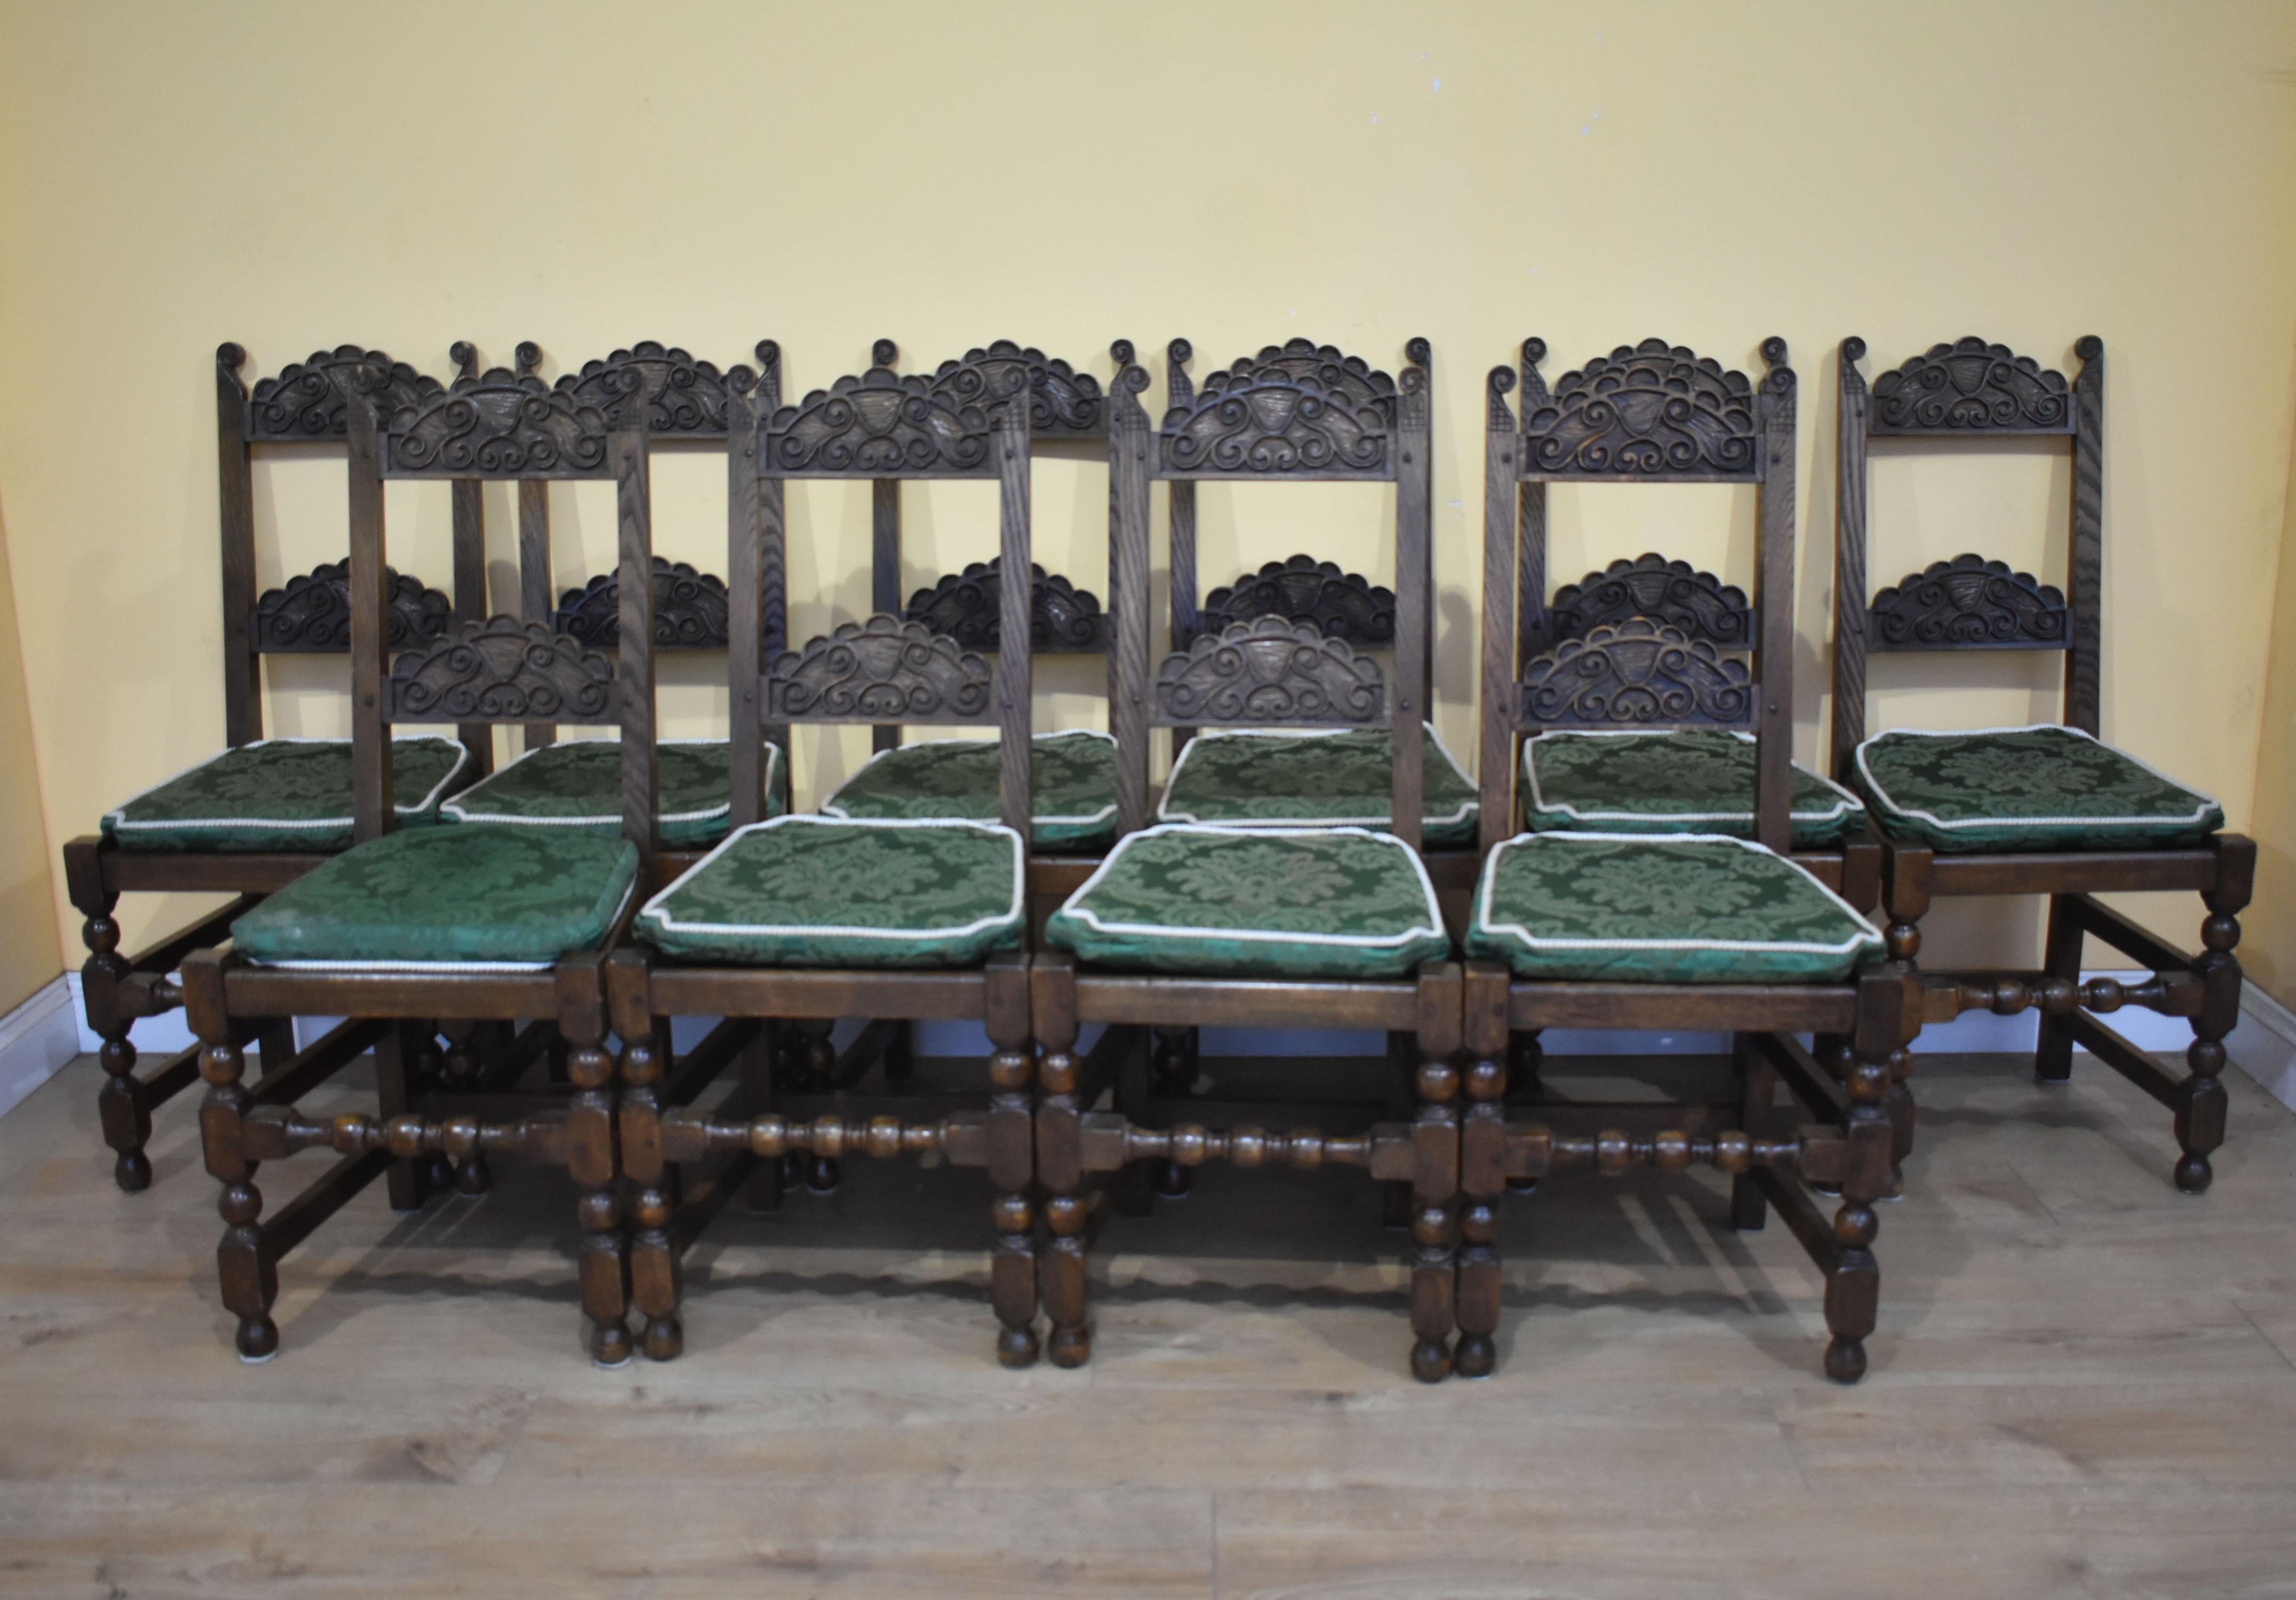 For sale is a good quality set of 12 carved oak dining chairs. Each chair has two carved back rails and Stand on turned legs, united by straight and turned stretchers. Each chair is made from solid oak and remain structurally sound and in very good